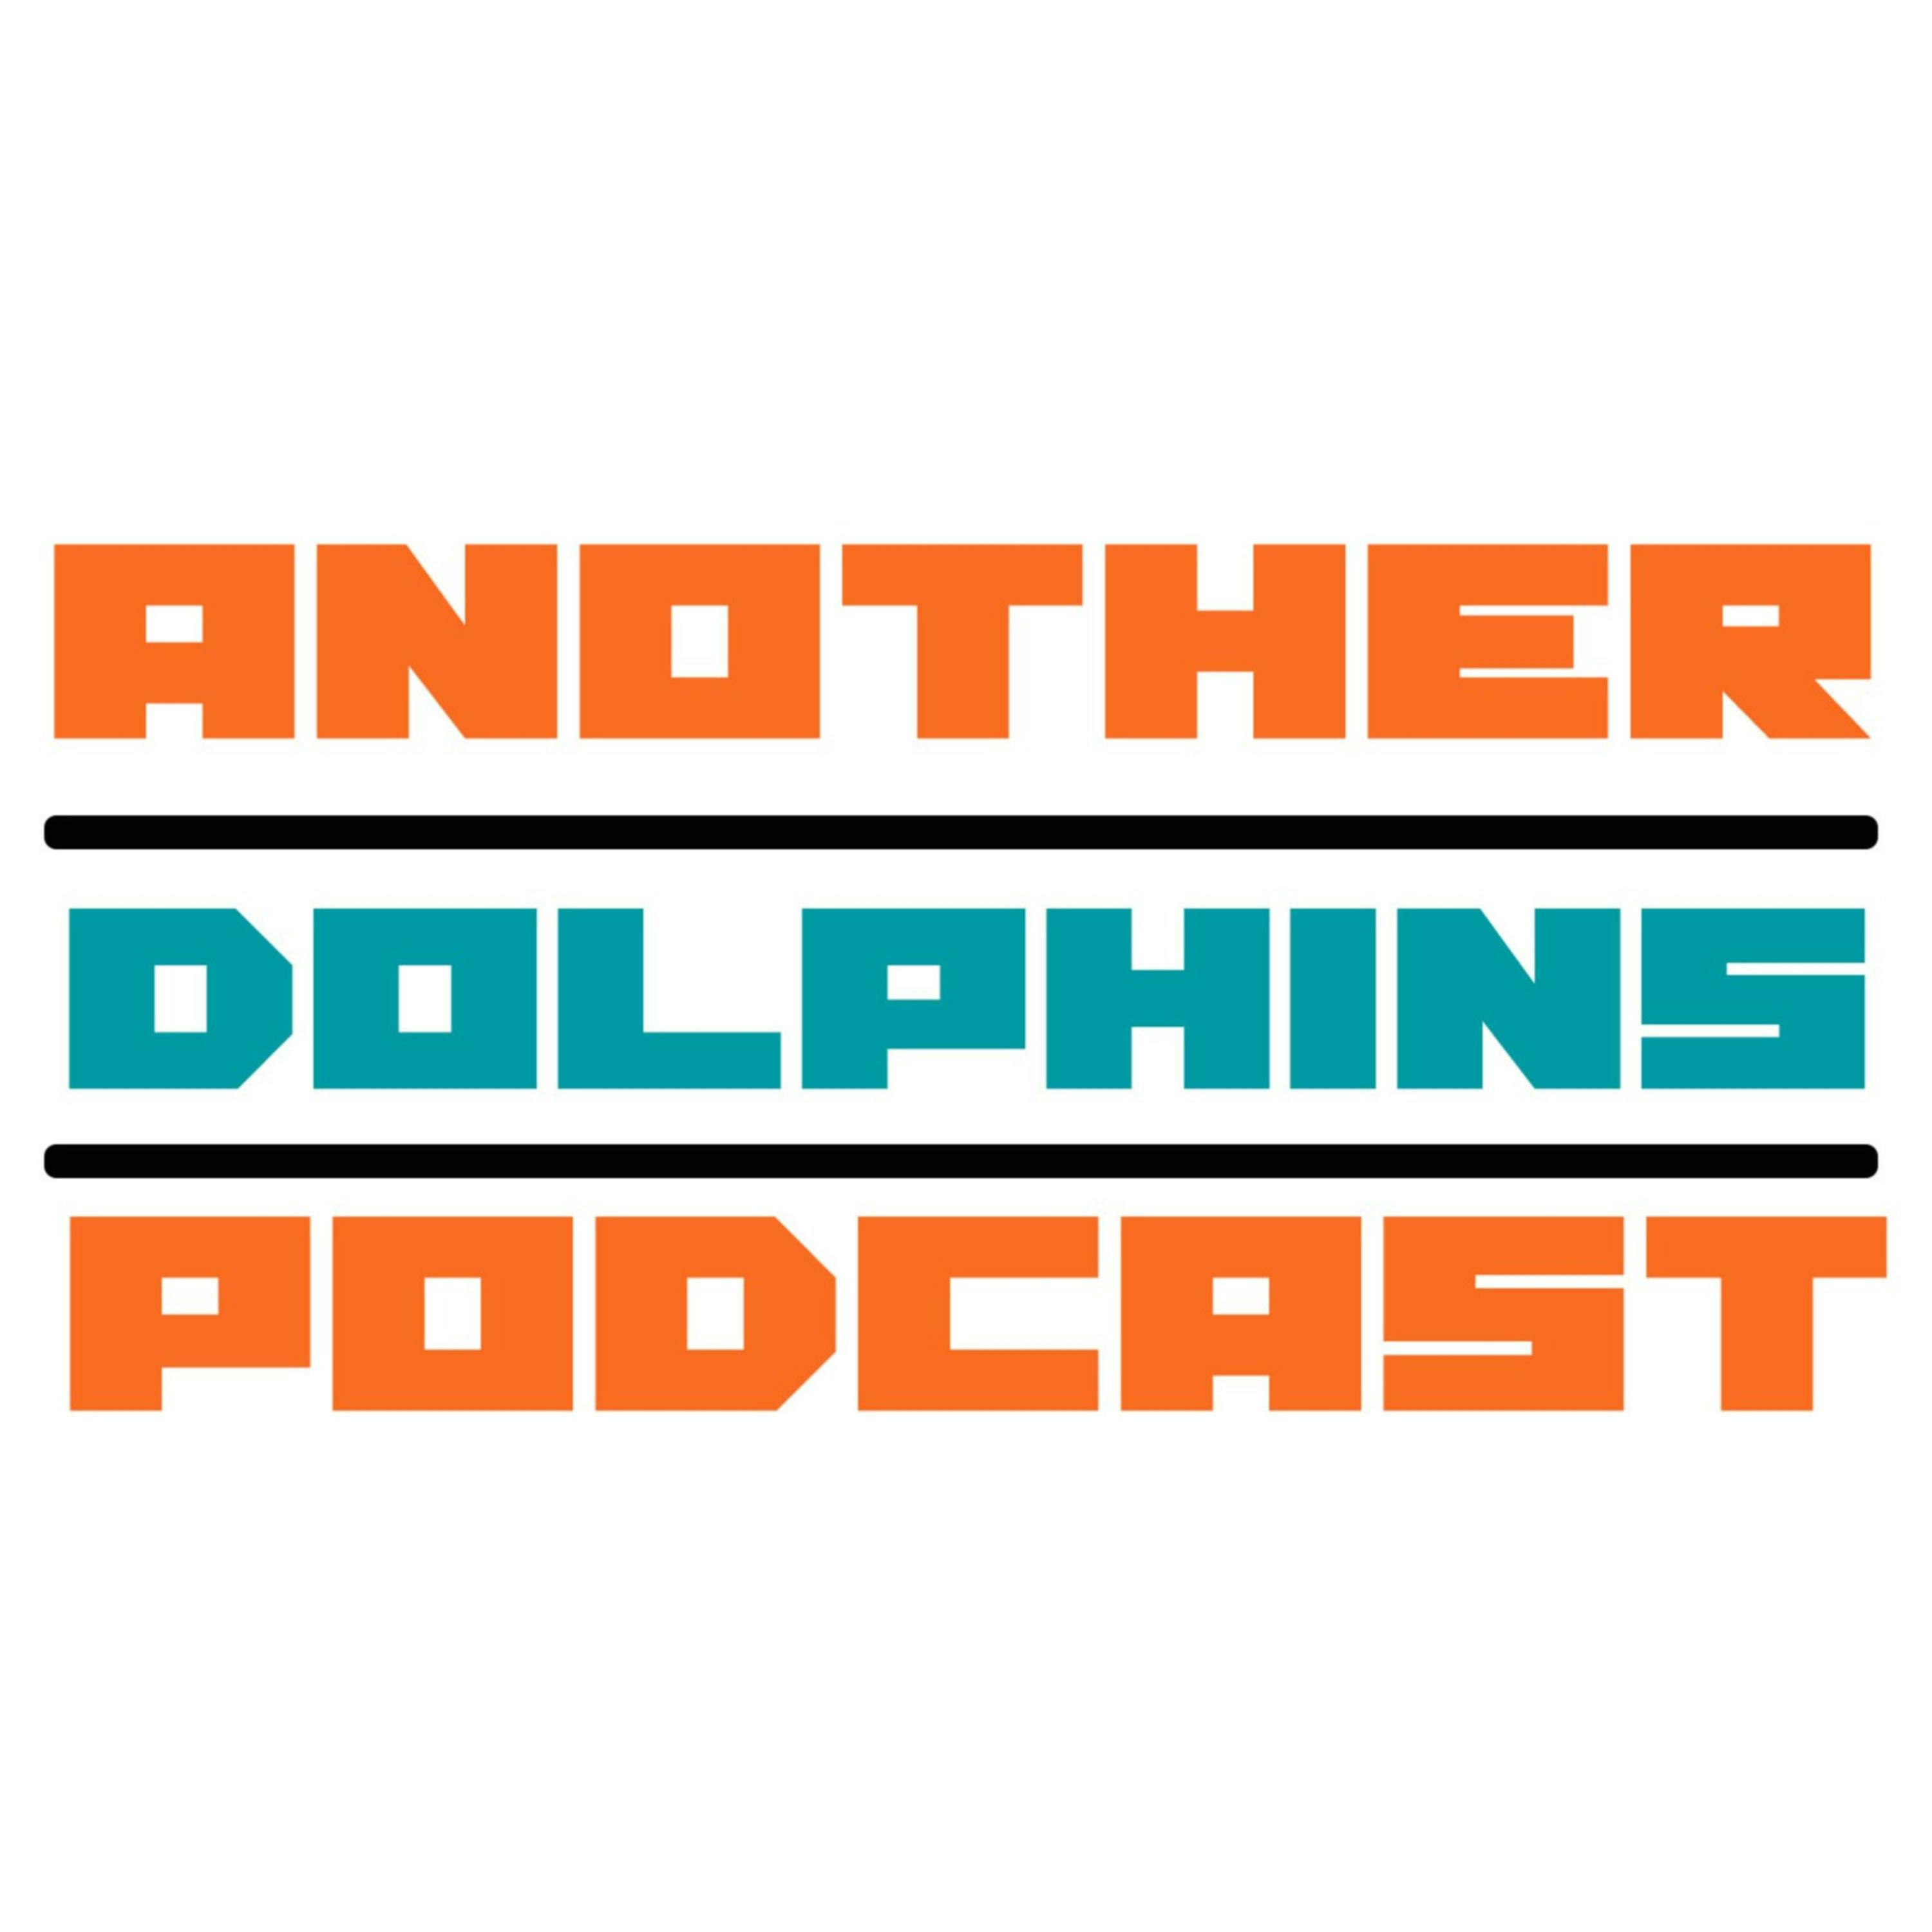 Miami Dolphins (Phinsider Radio) The latest NFL Draft rumors and how the Coronavirus could impact the Dolphins draft plans